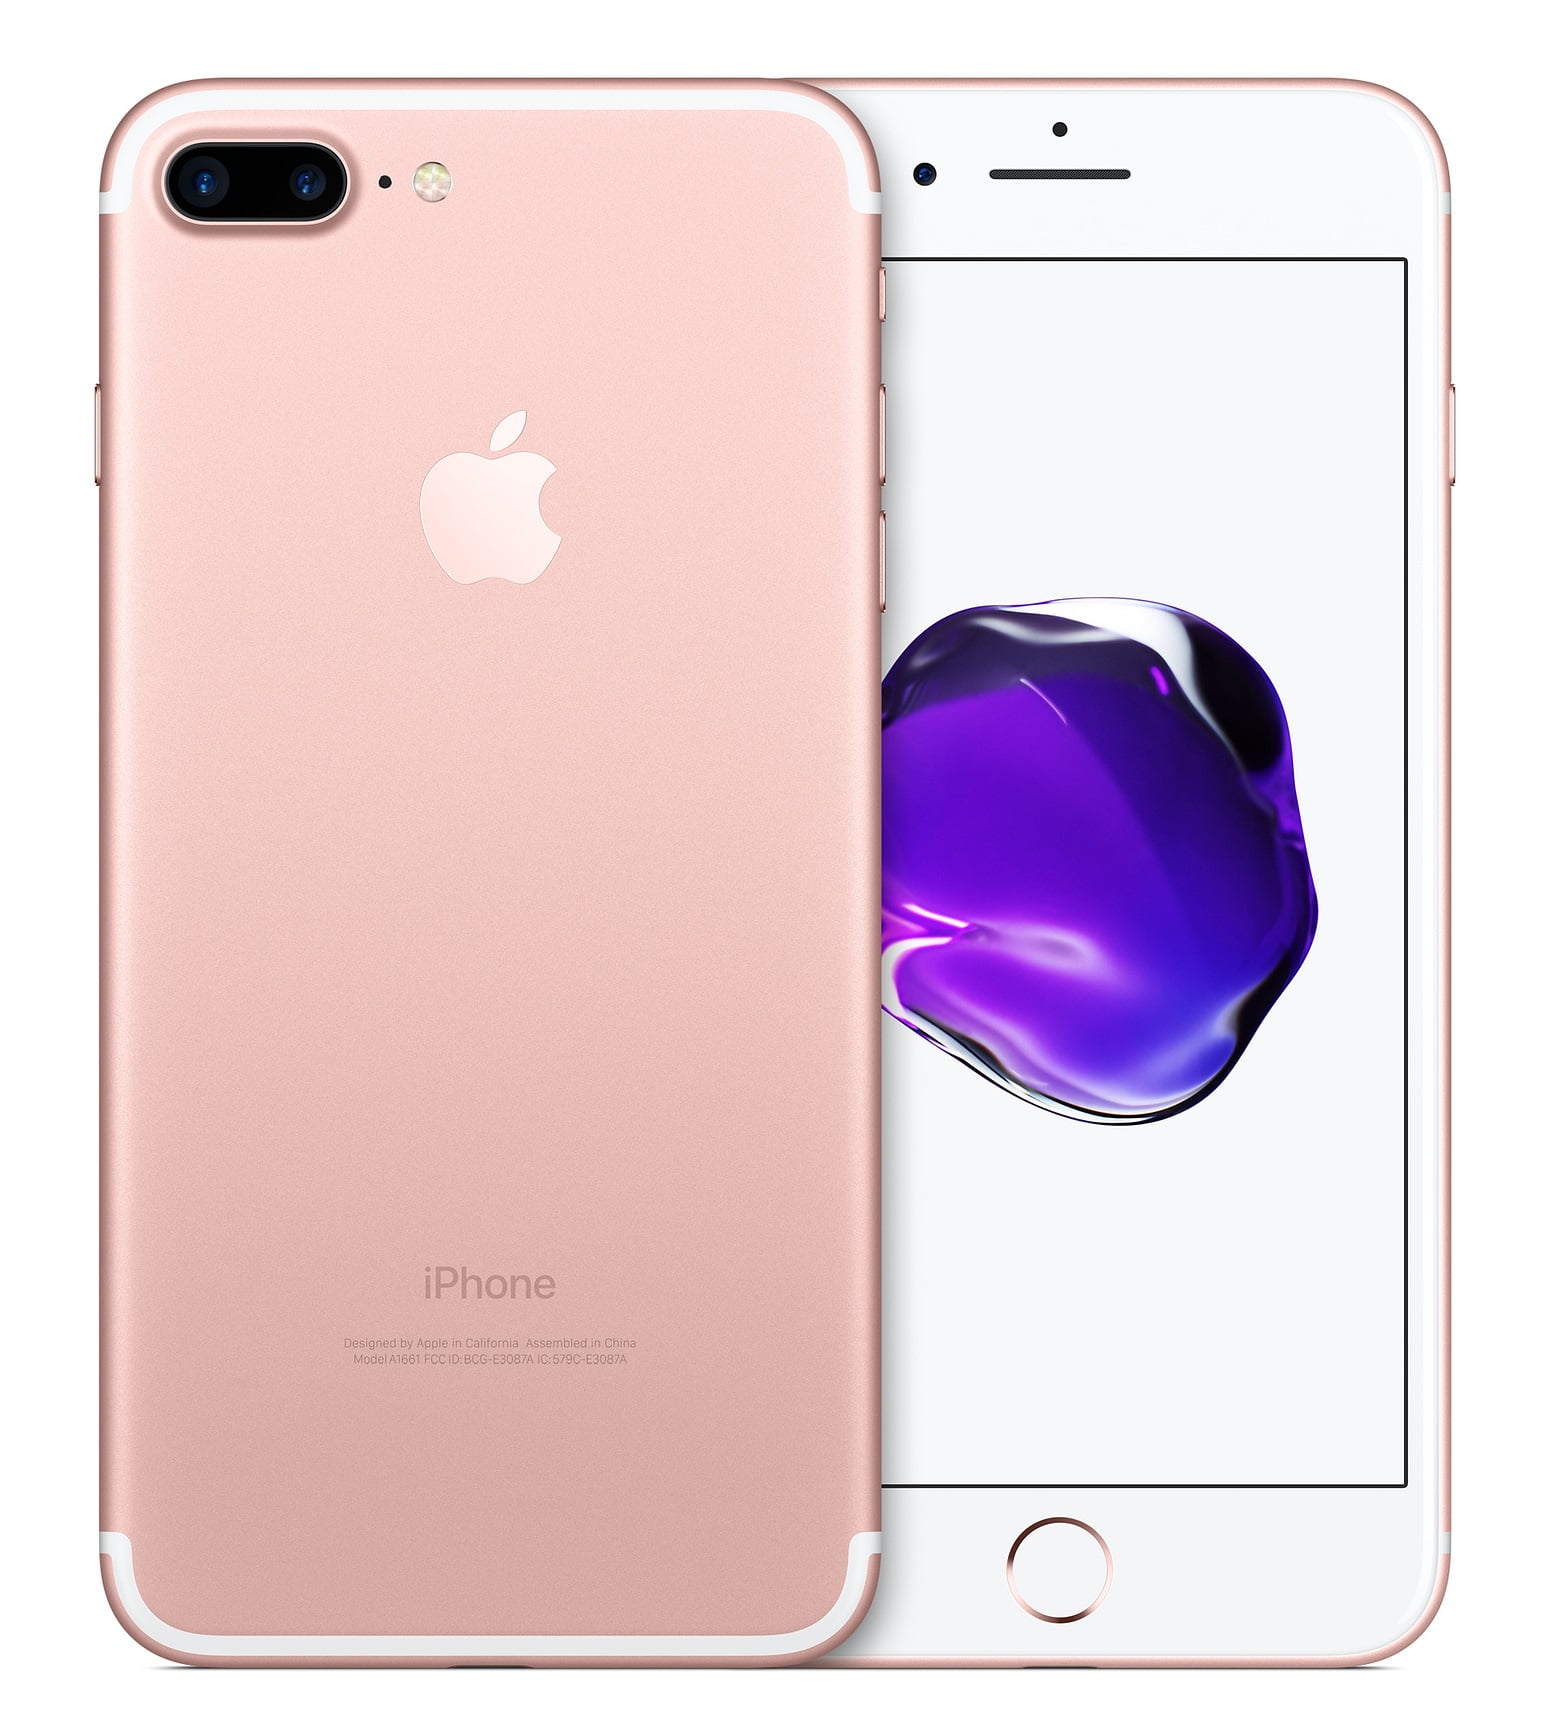 Apple iPhone 7 Plus 128GB Rose Gold (Boost Mobile) Used Good Condition ...